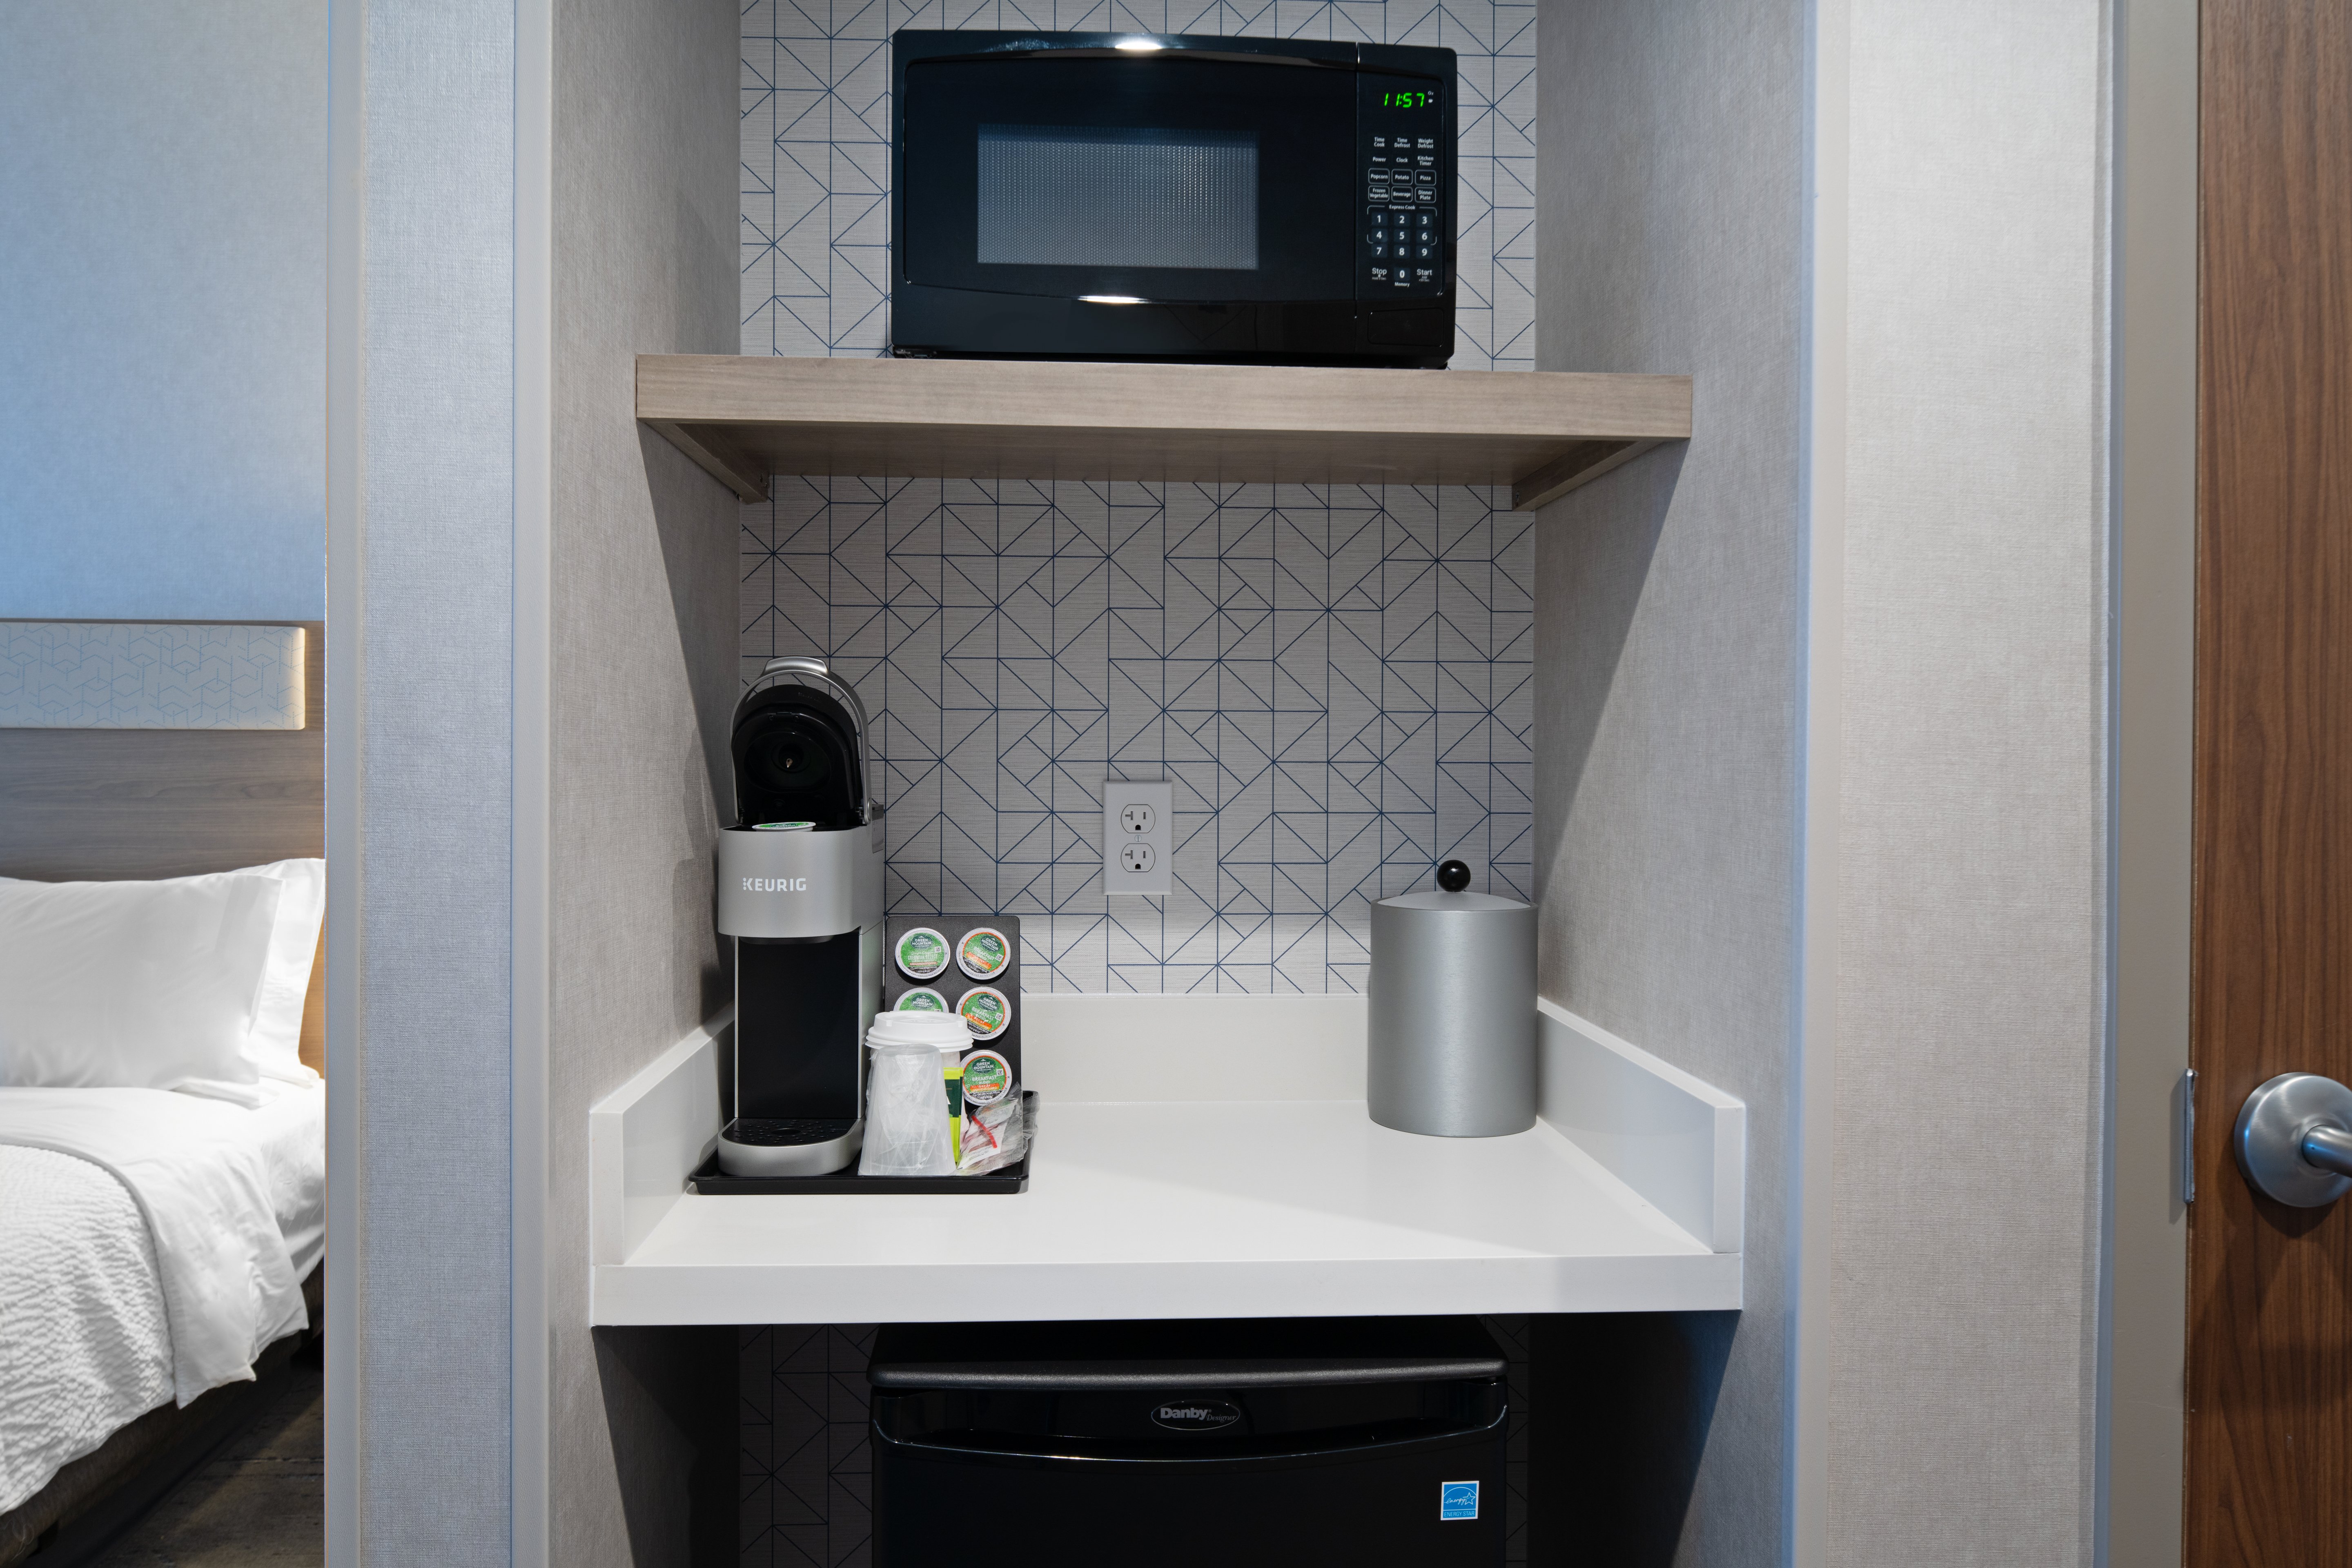 In room microwave mini fridge coffee maker and safe